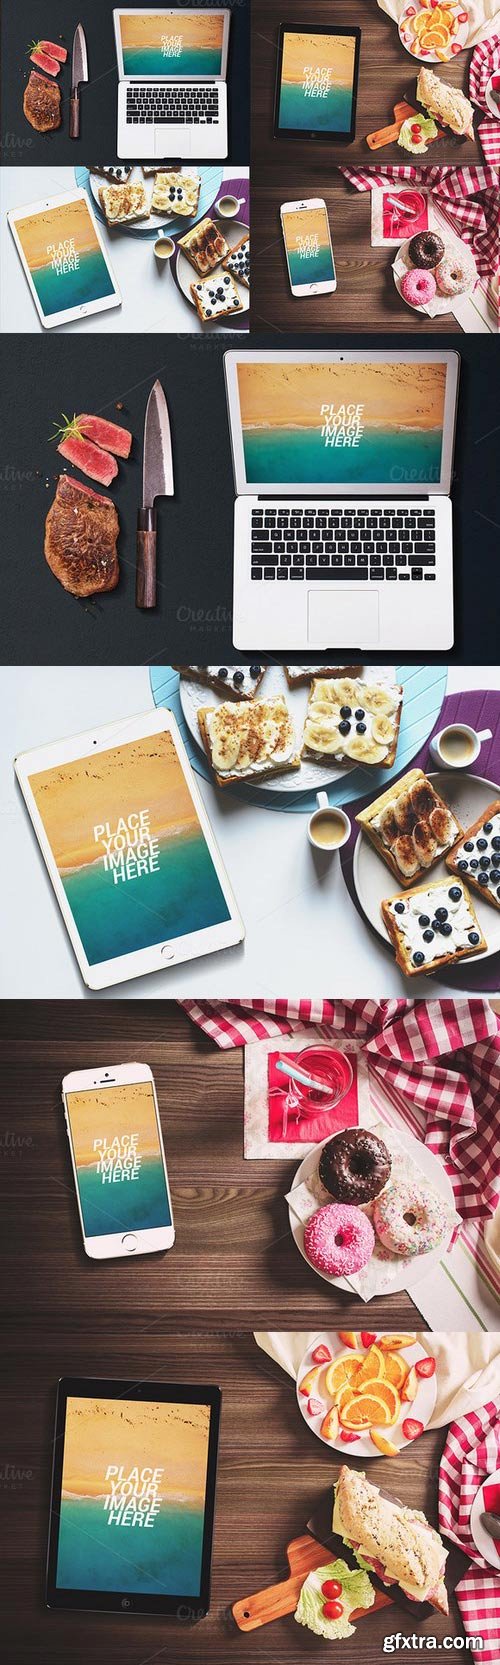 CM - Devices And Food - Mockups 371853